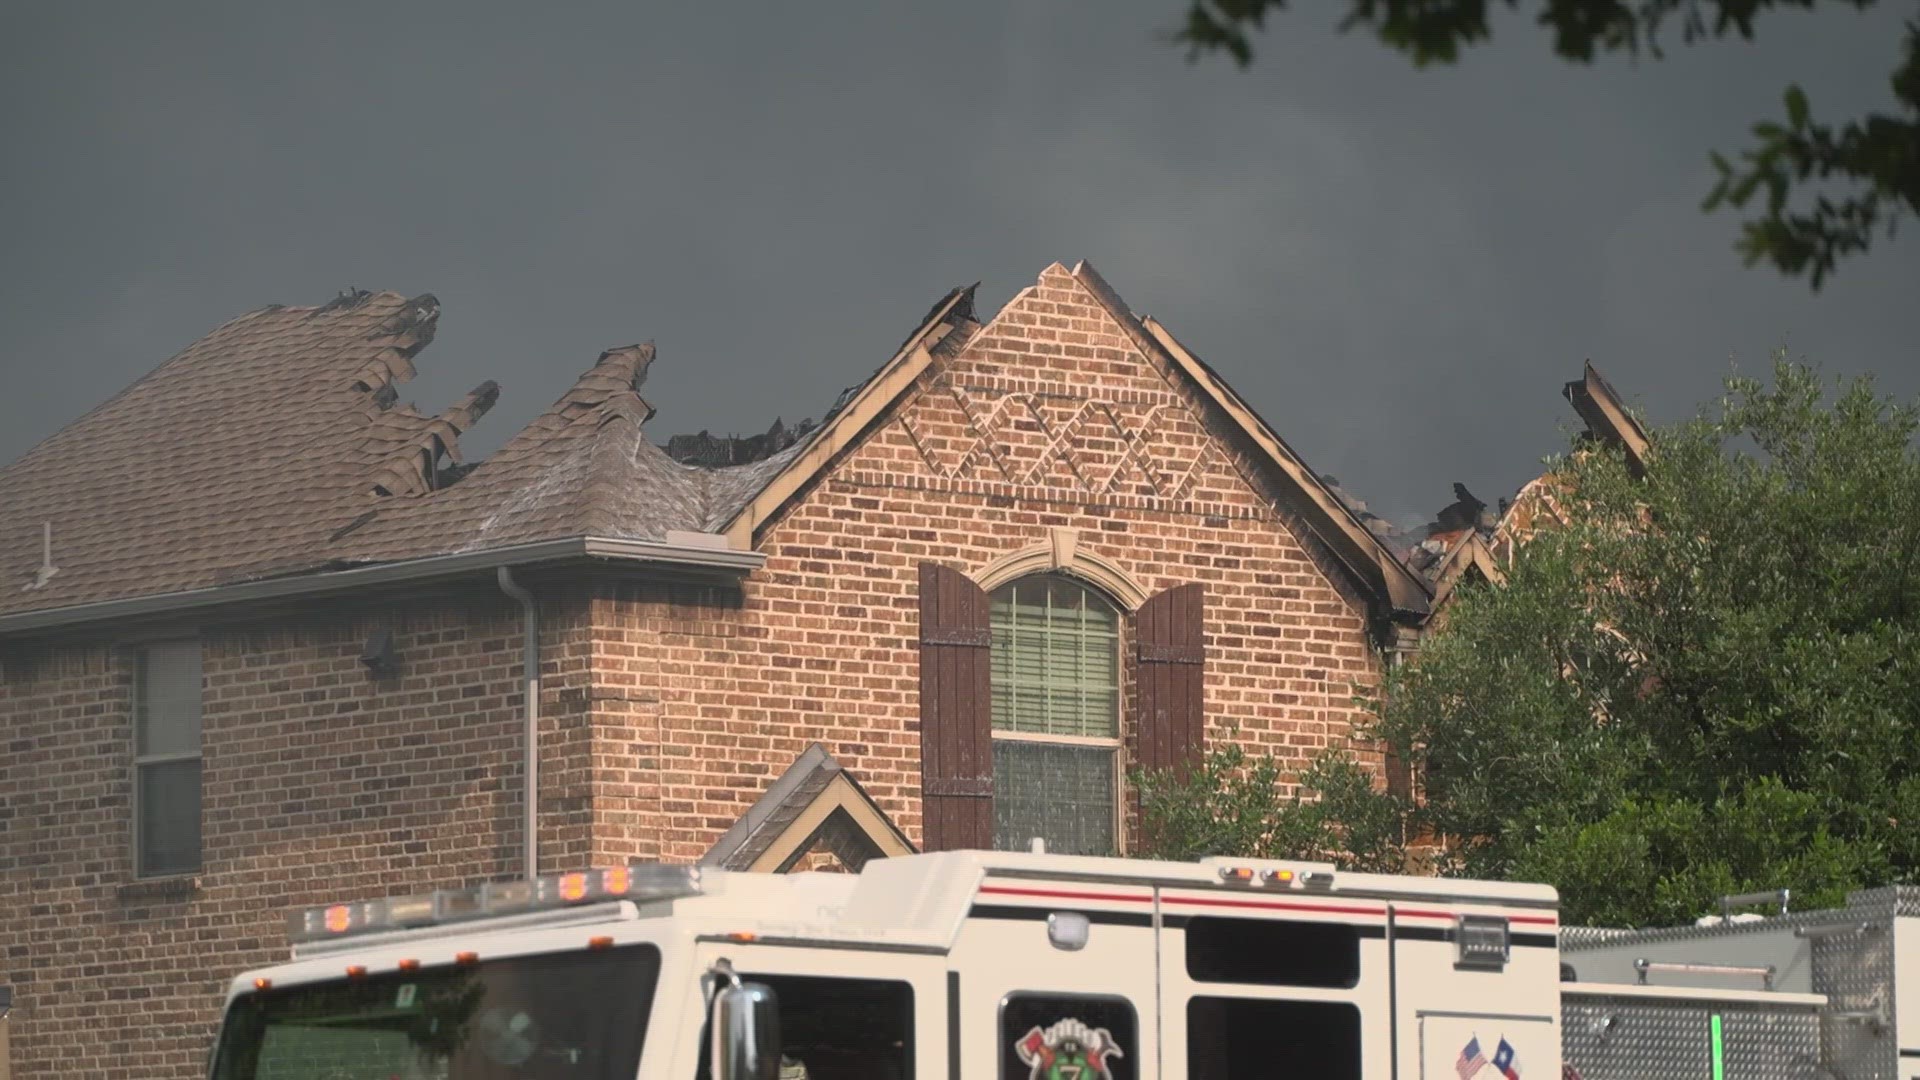 Both of the homes in the neighborhood were uninhabitable due to the extensive damage.